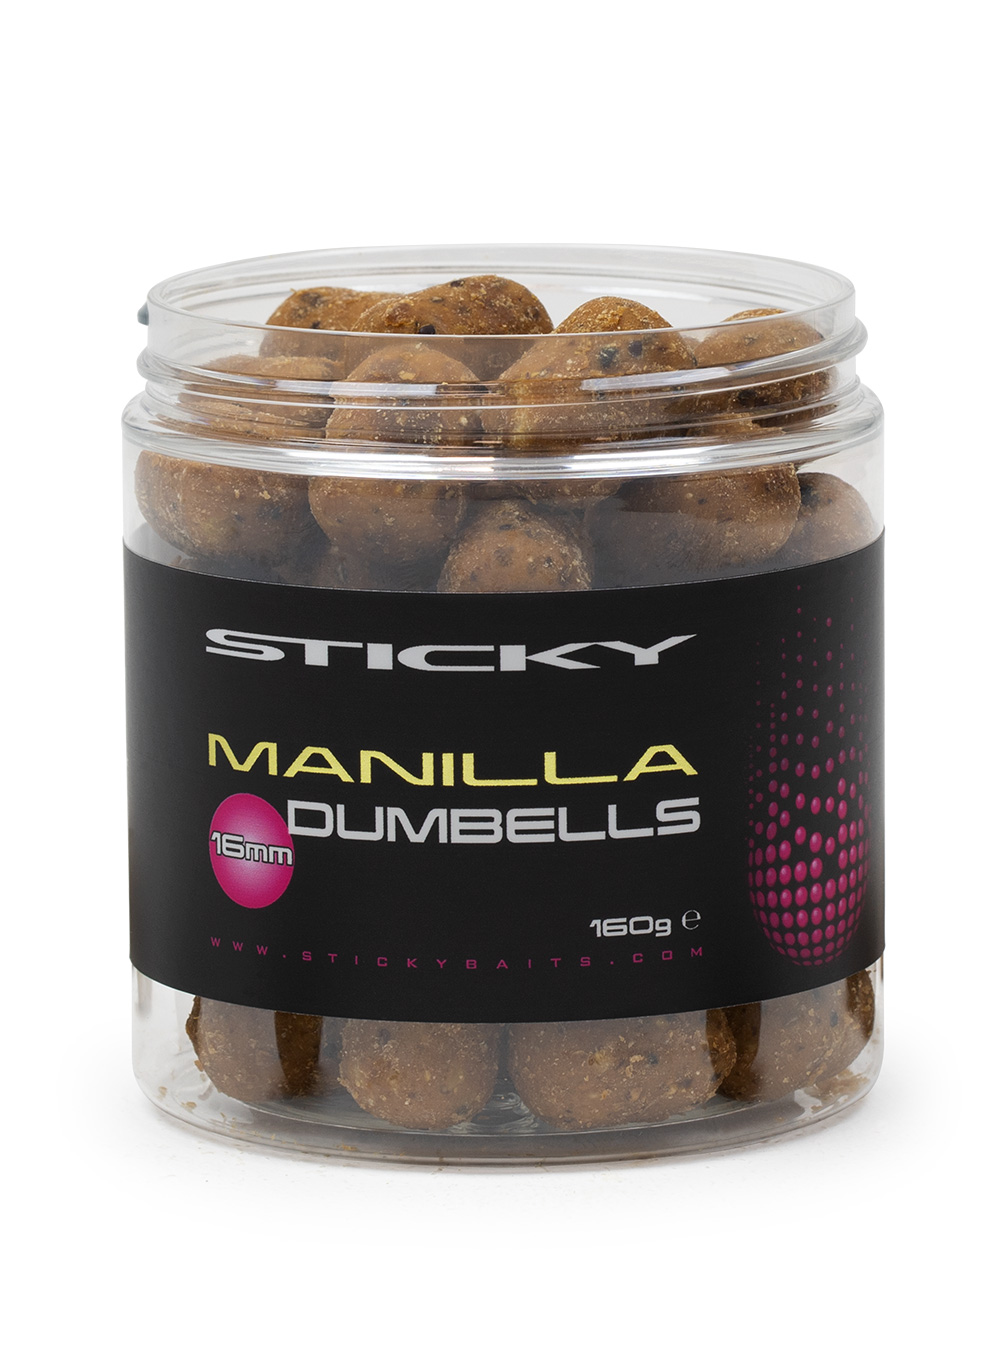 New Sticky Baits Manille Dumbells 16 mm 160 g MD16 